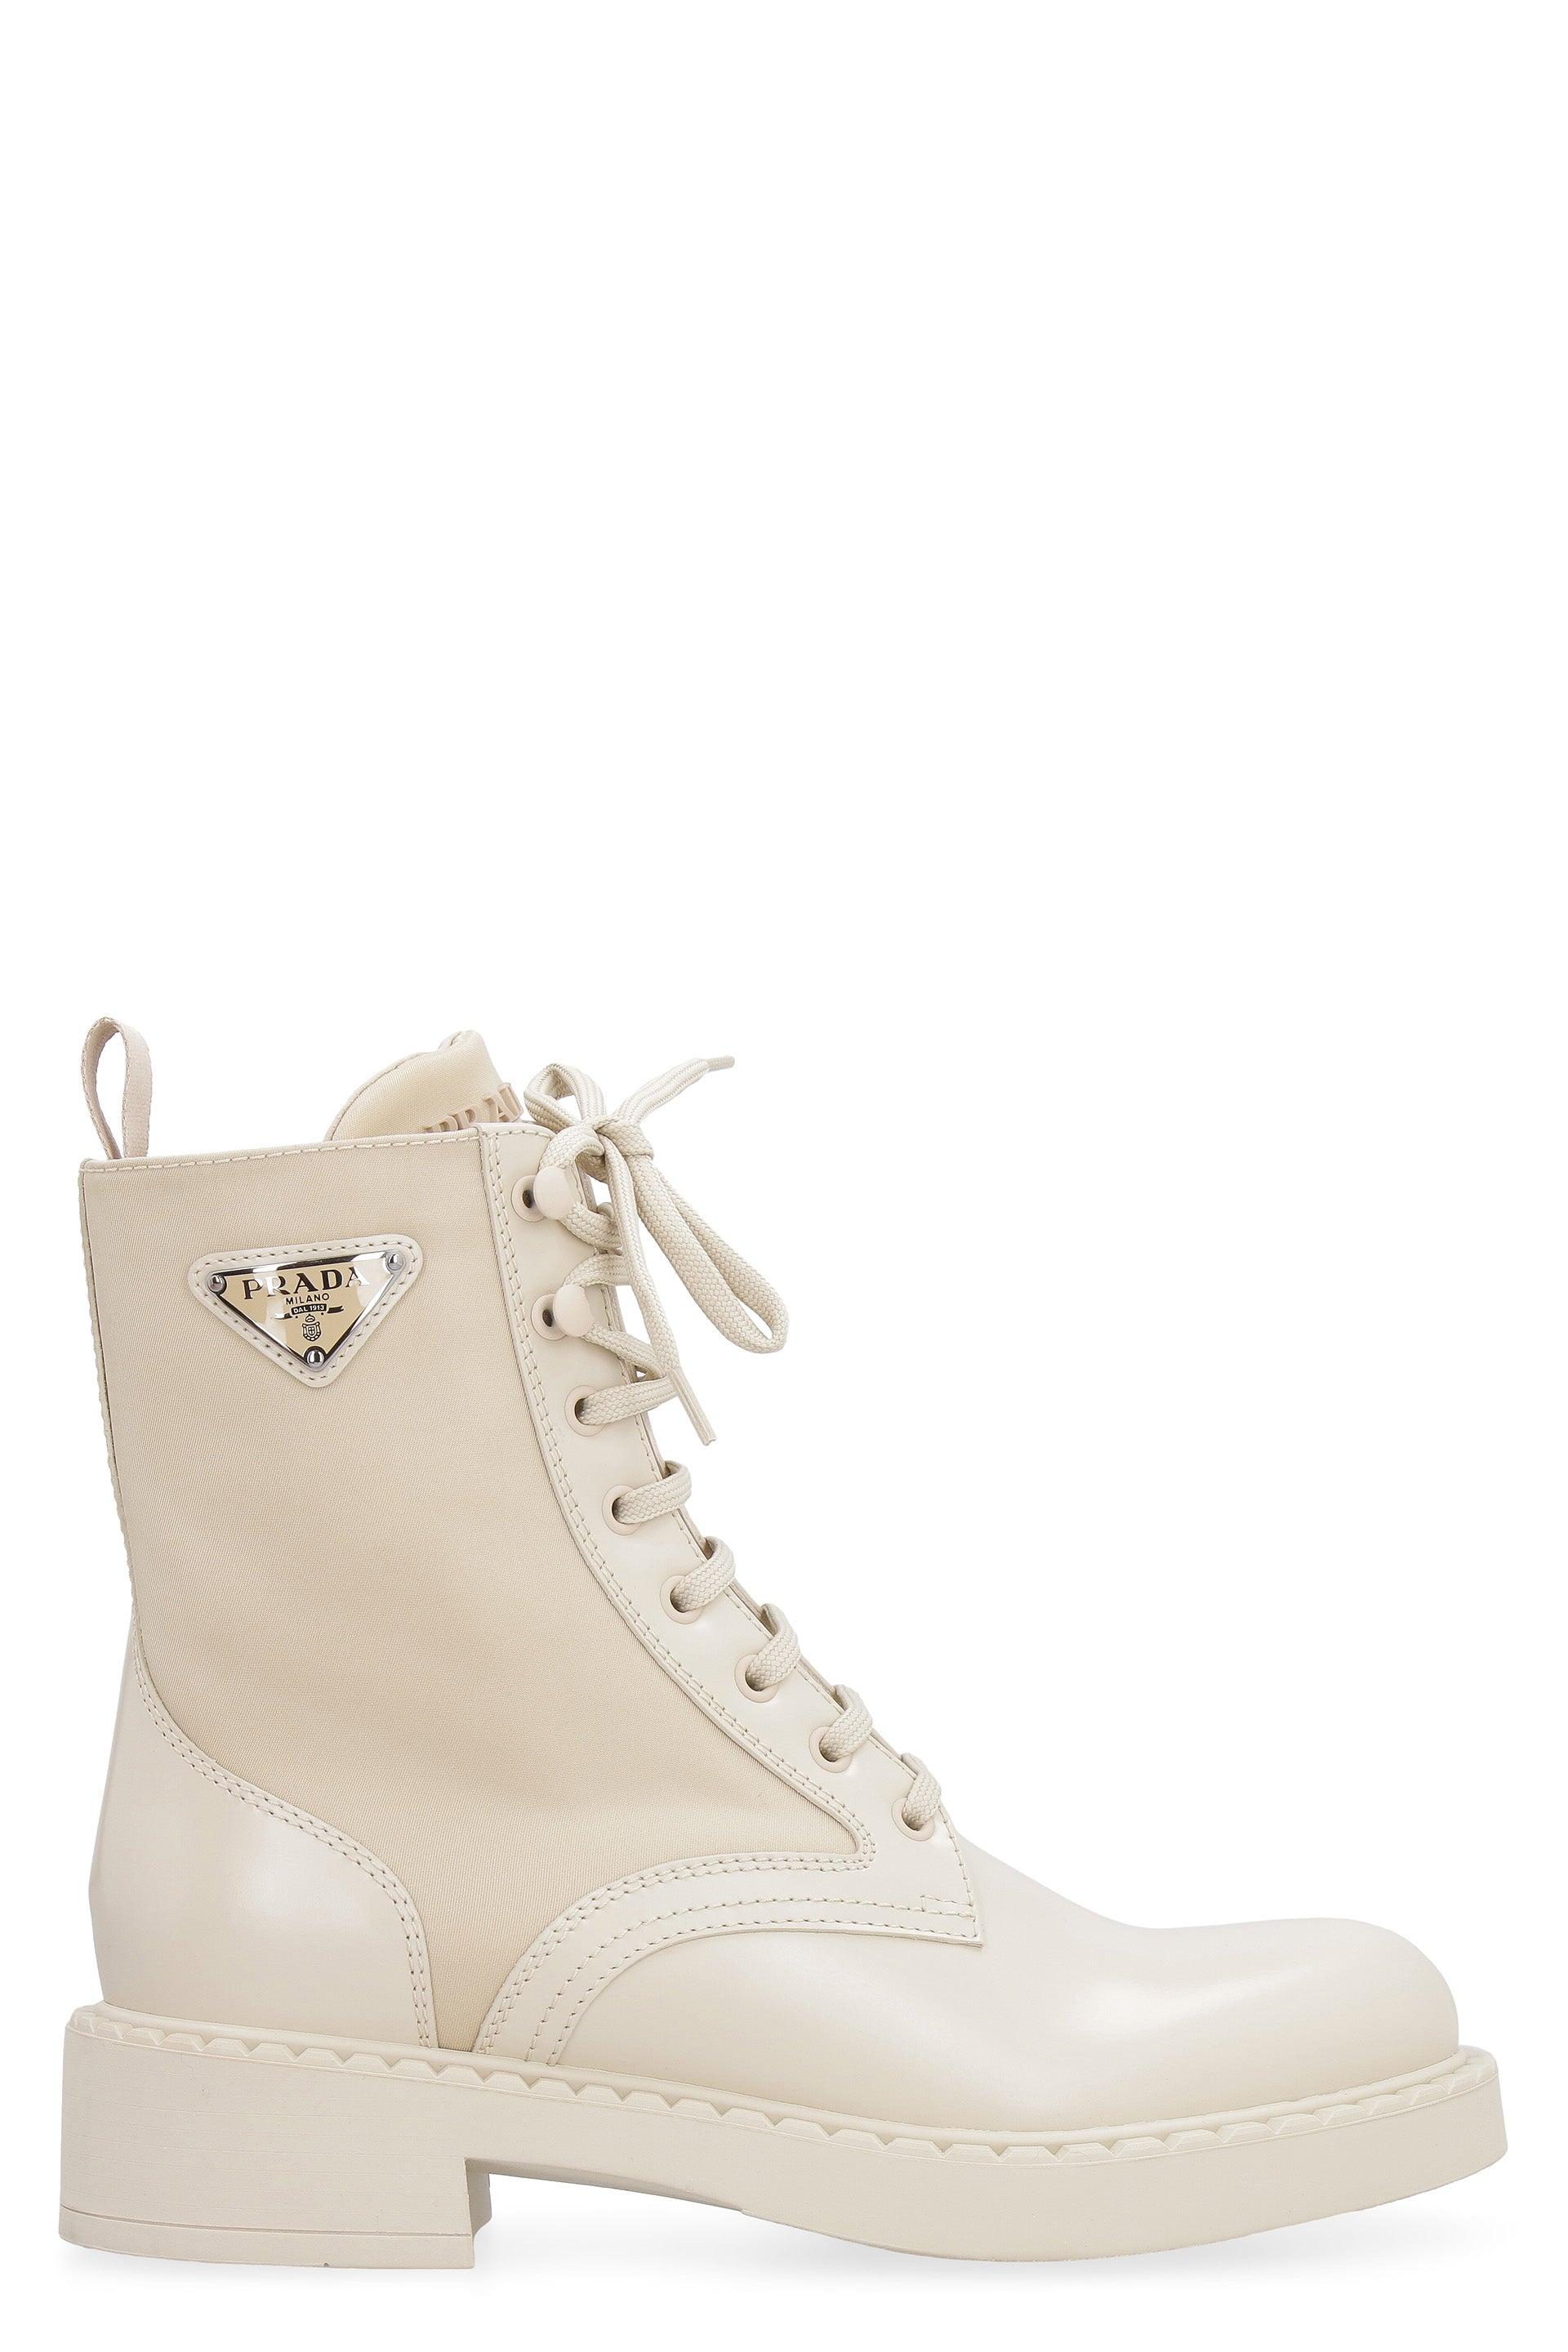 Prada Synthetic Lace-up Ankle Boots in Nude (Natural) - Save 65% | Lyst